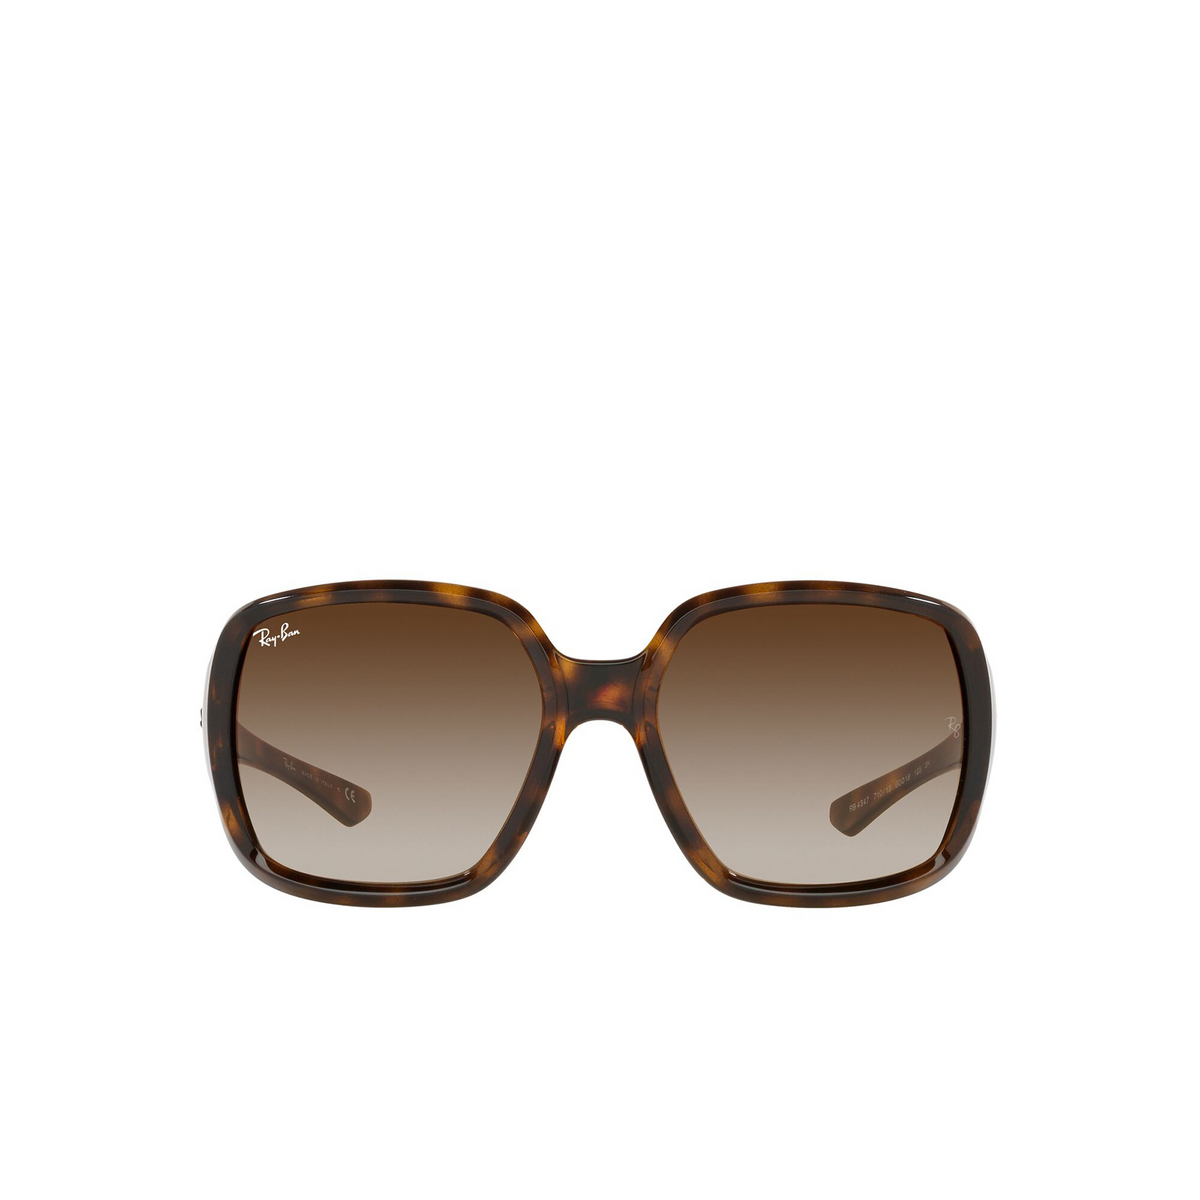 Ray-Ban RB4347 Sunglasses 710/13 Havana - front view